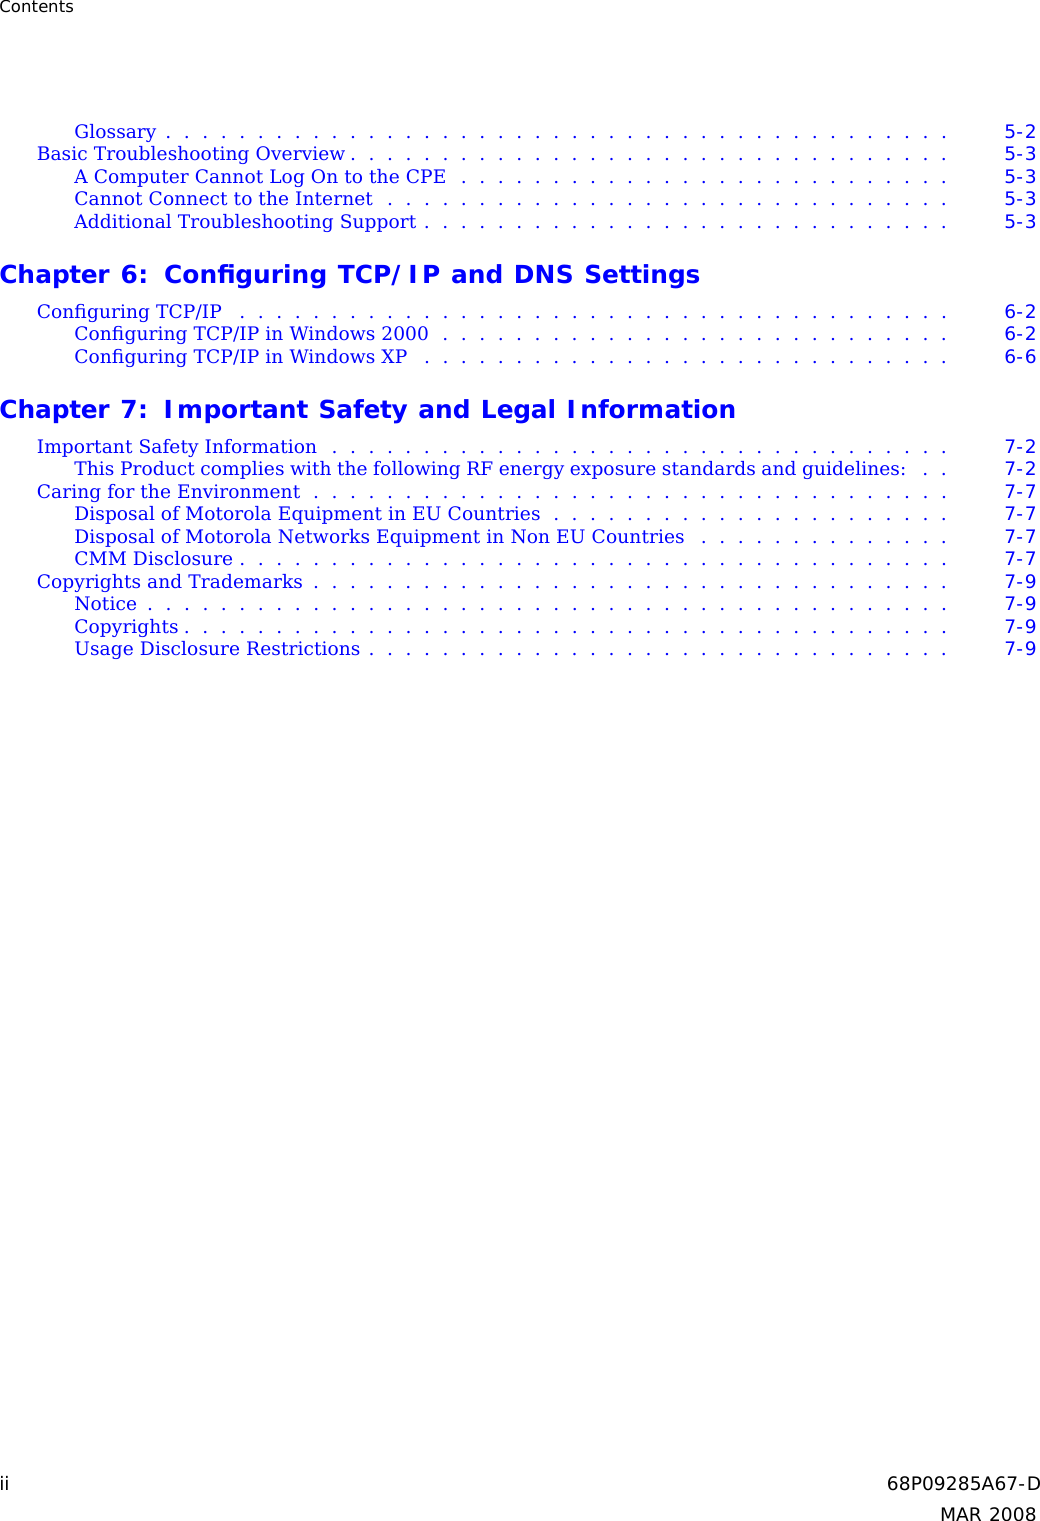 ContentsGlossary........................................... 5-2BasicTroubleshootingOverview................................. 5-3AComputerCannotLogOntotheCPE........................... 5-3CannotConnecttotheInternet............................... 5-3AdditionalTroubleshootingSupport............................. 5-3Chapter 6: Conﬁguring TCP/IP and DNS SettingsConﬁguringTCP/IP ....................................... 6-2ConﬁguringTCP/IPinWindows2000............................ 6-2ConﬁguringTCP/IPinWindowsXP ............................. 6-6Chapter 7: Important Safety and Legal InformationImportantSafetyInformation.................................. 7-2This Product complies with the following RF energy exposure standards and guidelines: . . 7-2CaringfortheEnvironment................................... 7-7DisposalofMotorolaEquipmentinEUCountries...................... 7-7DisposalofMotorolaNetworksEquipmentinNonEUCountries .............. 7-7CMMDisclosure....................................... 7-7CopyrightsandTrademarks................................... 7-9Notice............................................ 7-9Copyrights.......................................... 7-9UsageDisclosureRestrictions................................ 7-9ii 68P09285A67-DMAR 2008